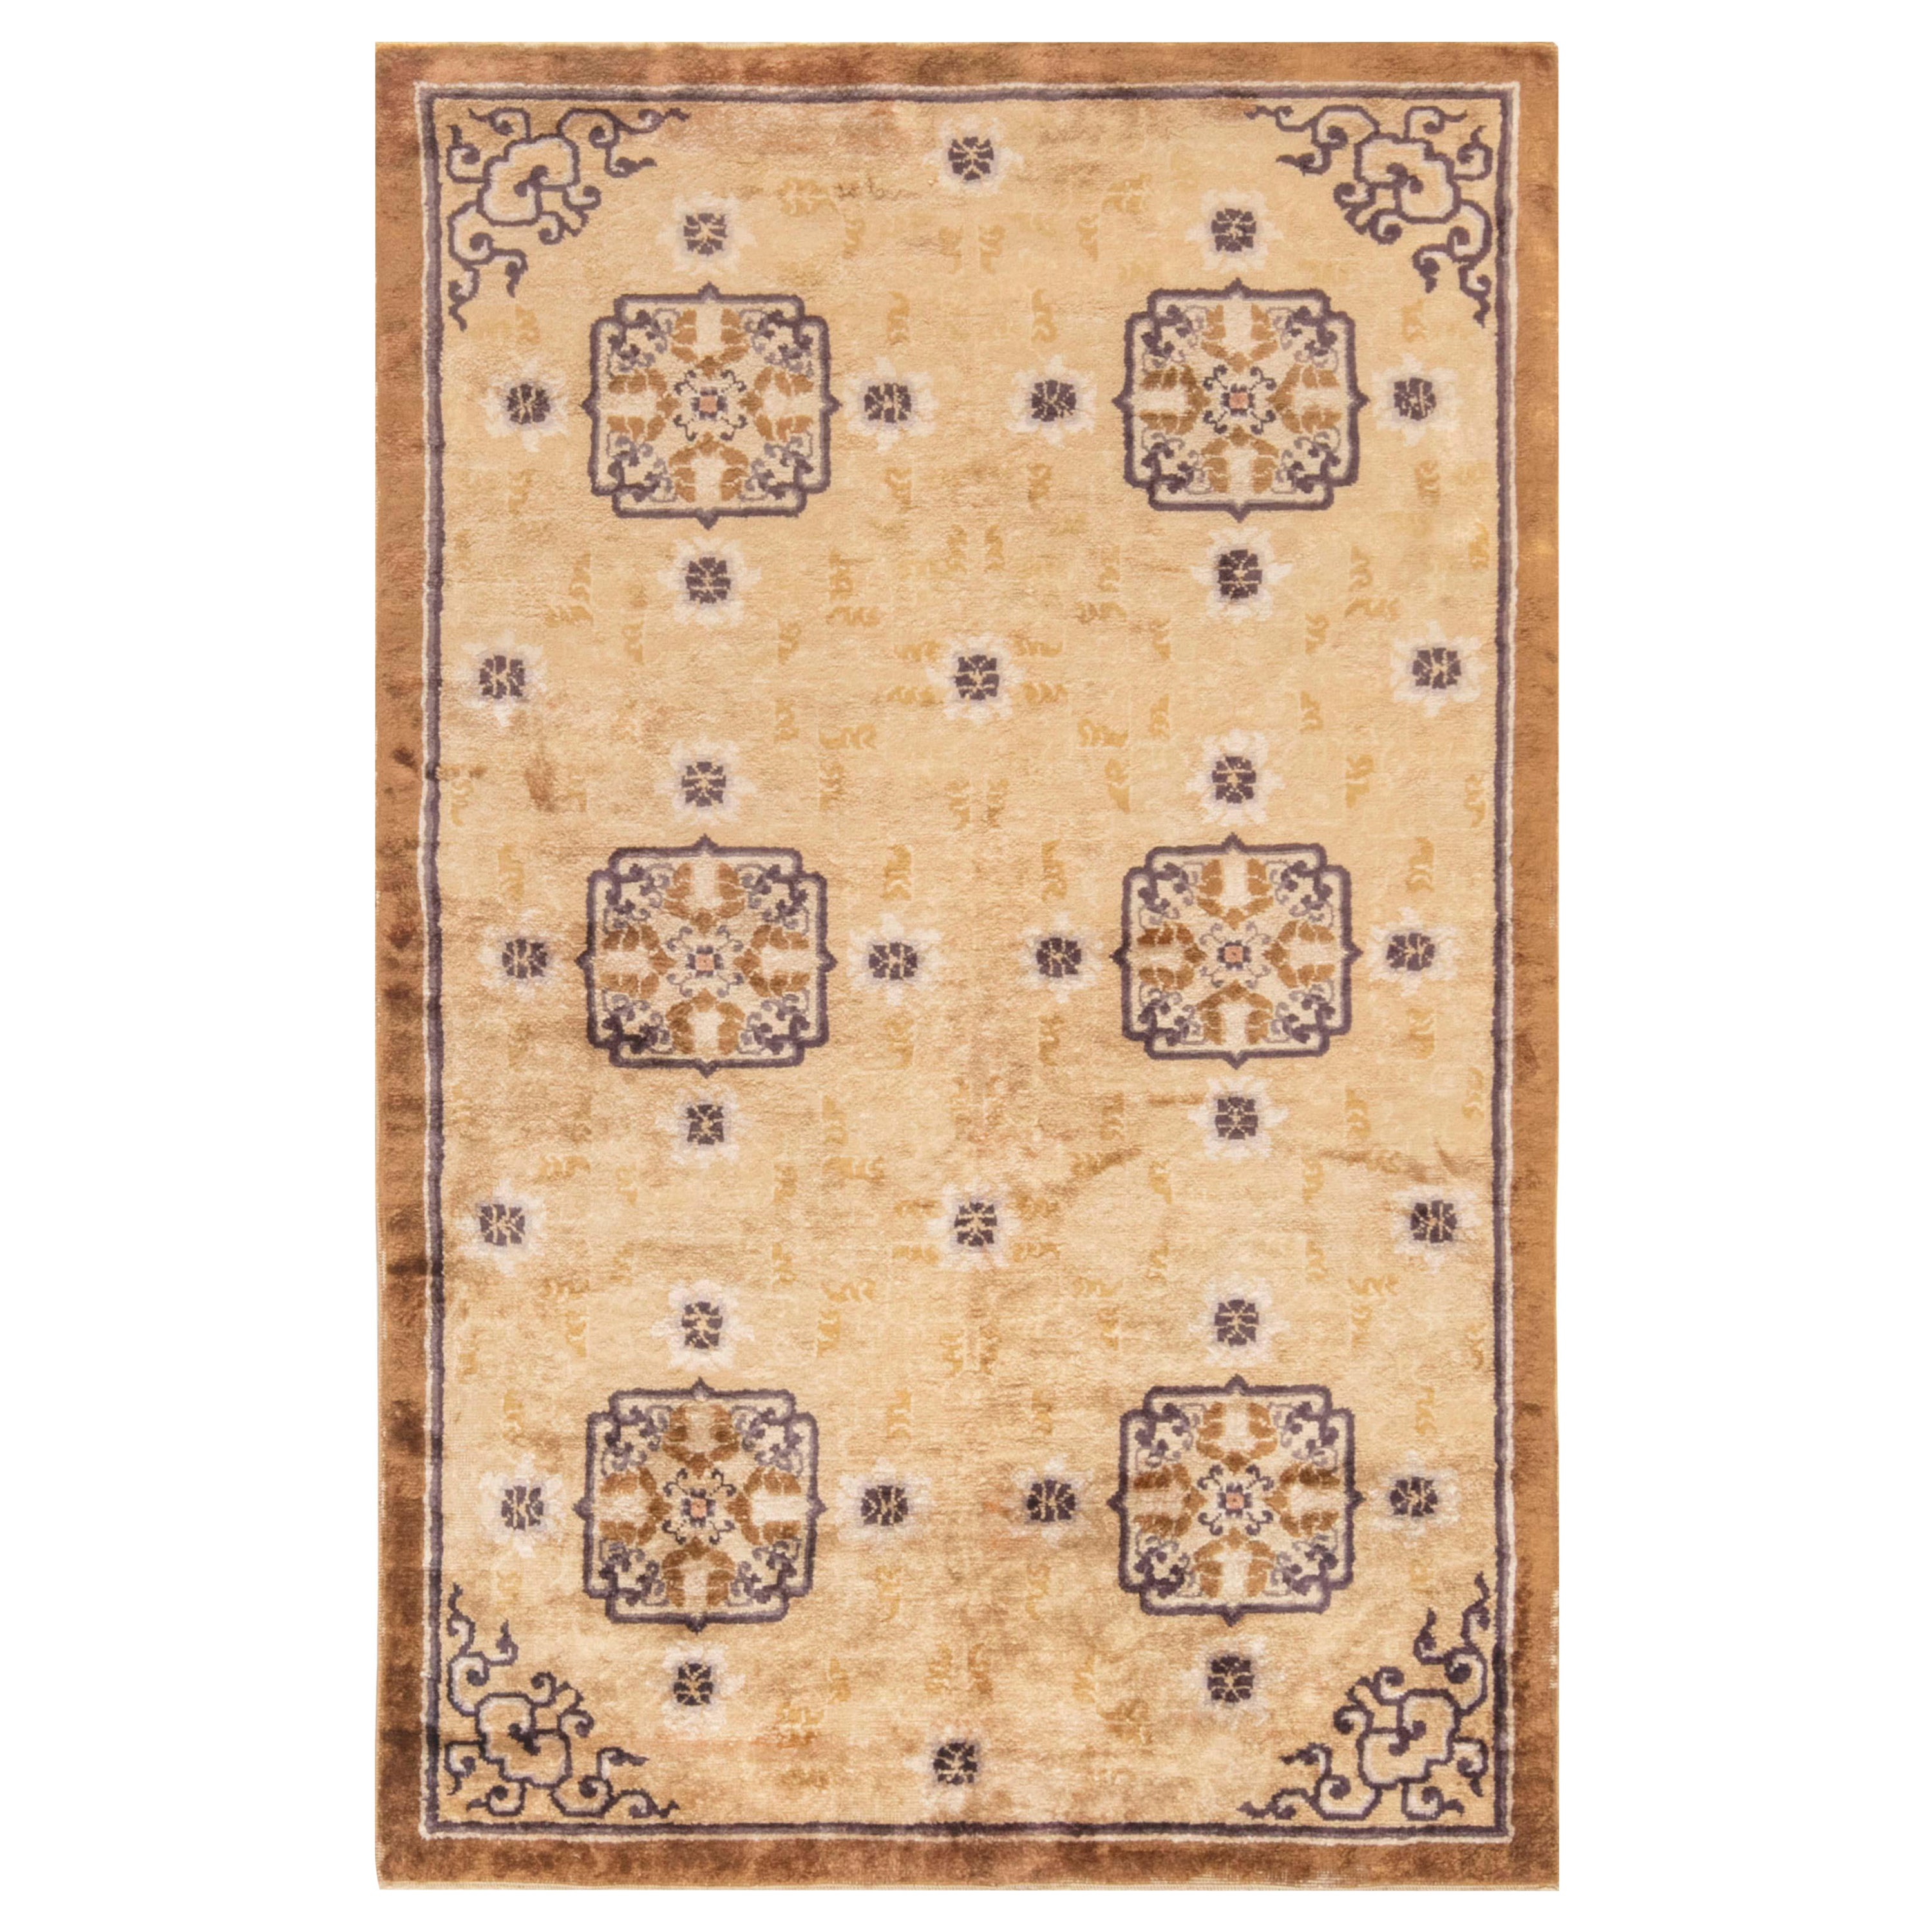 Authentic 1900s Chinese Geometric Handmade Rug For Sale